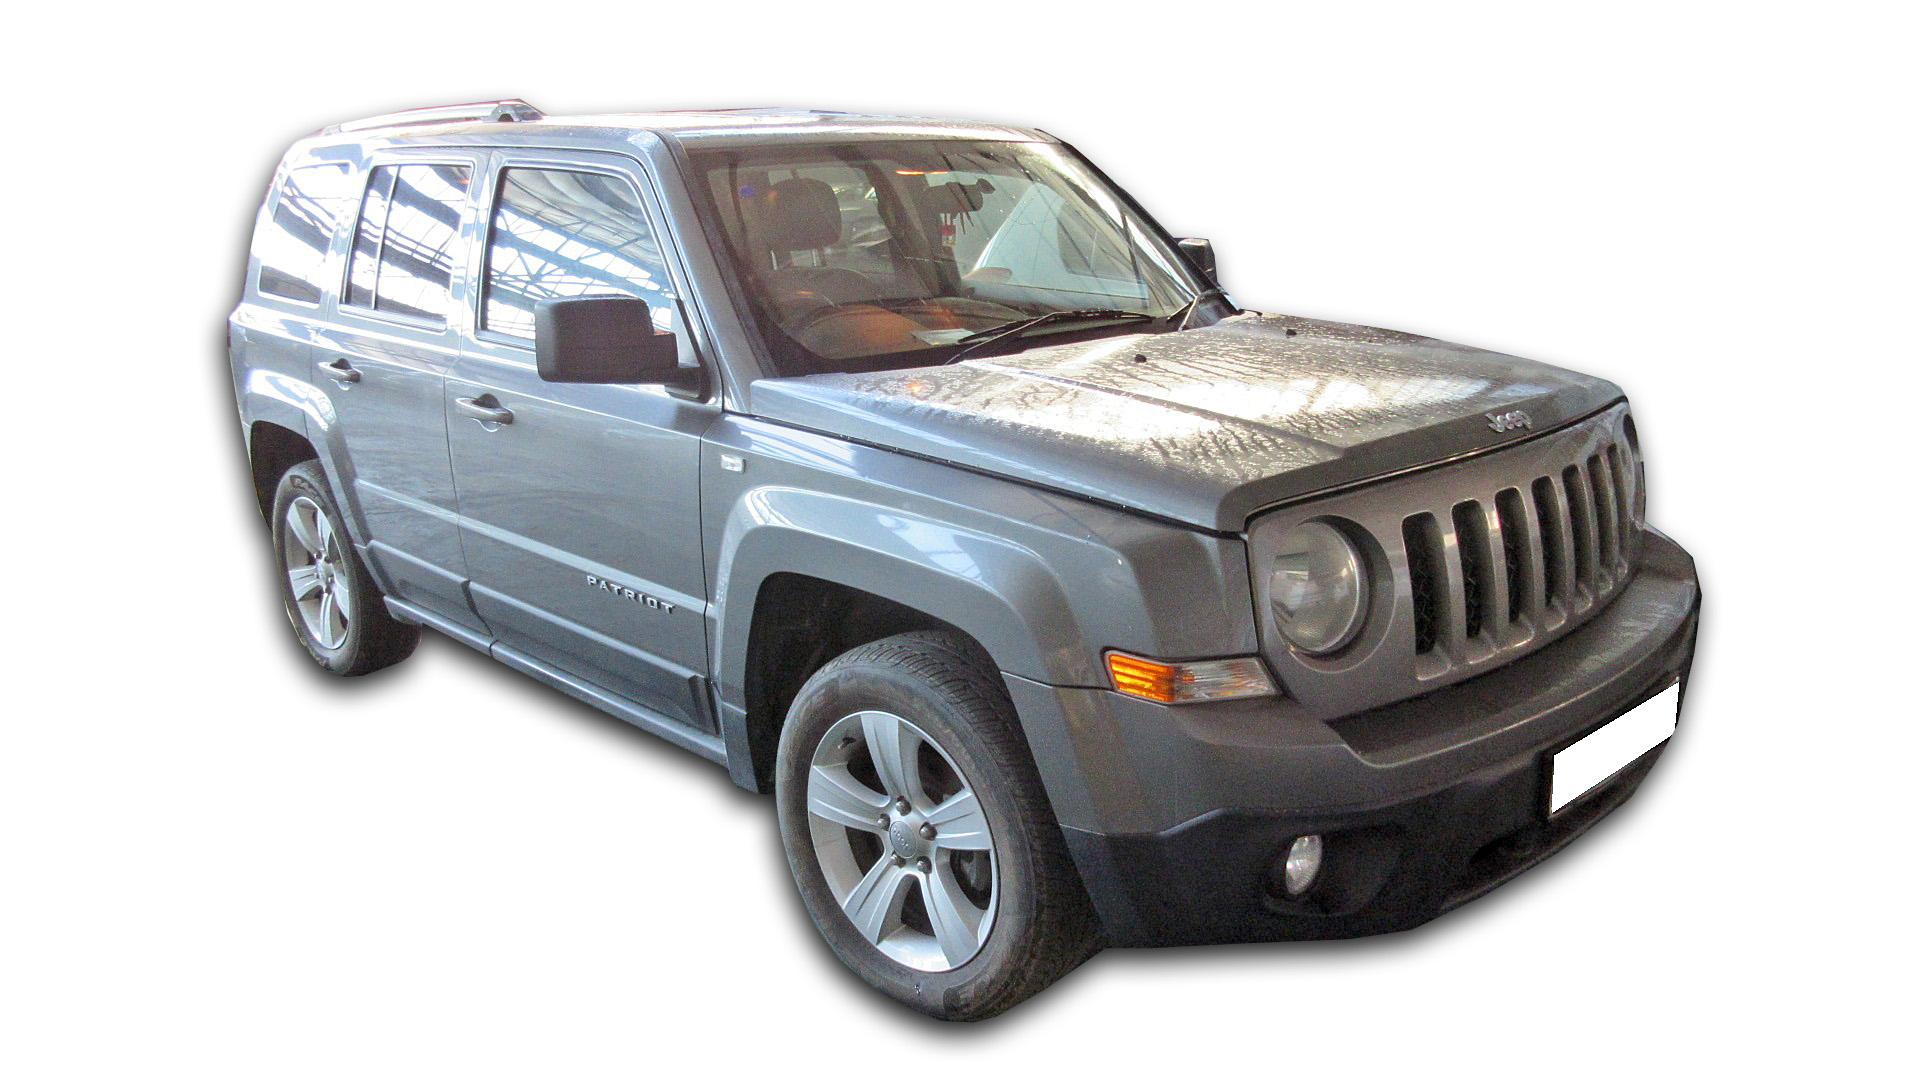 Repossessed Jeep Patriot 2.4 Limited CVT 2011 on auction